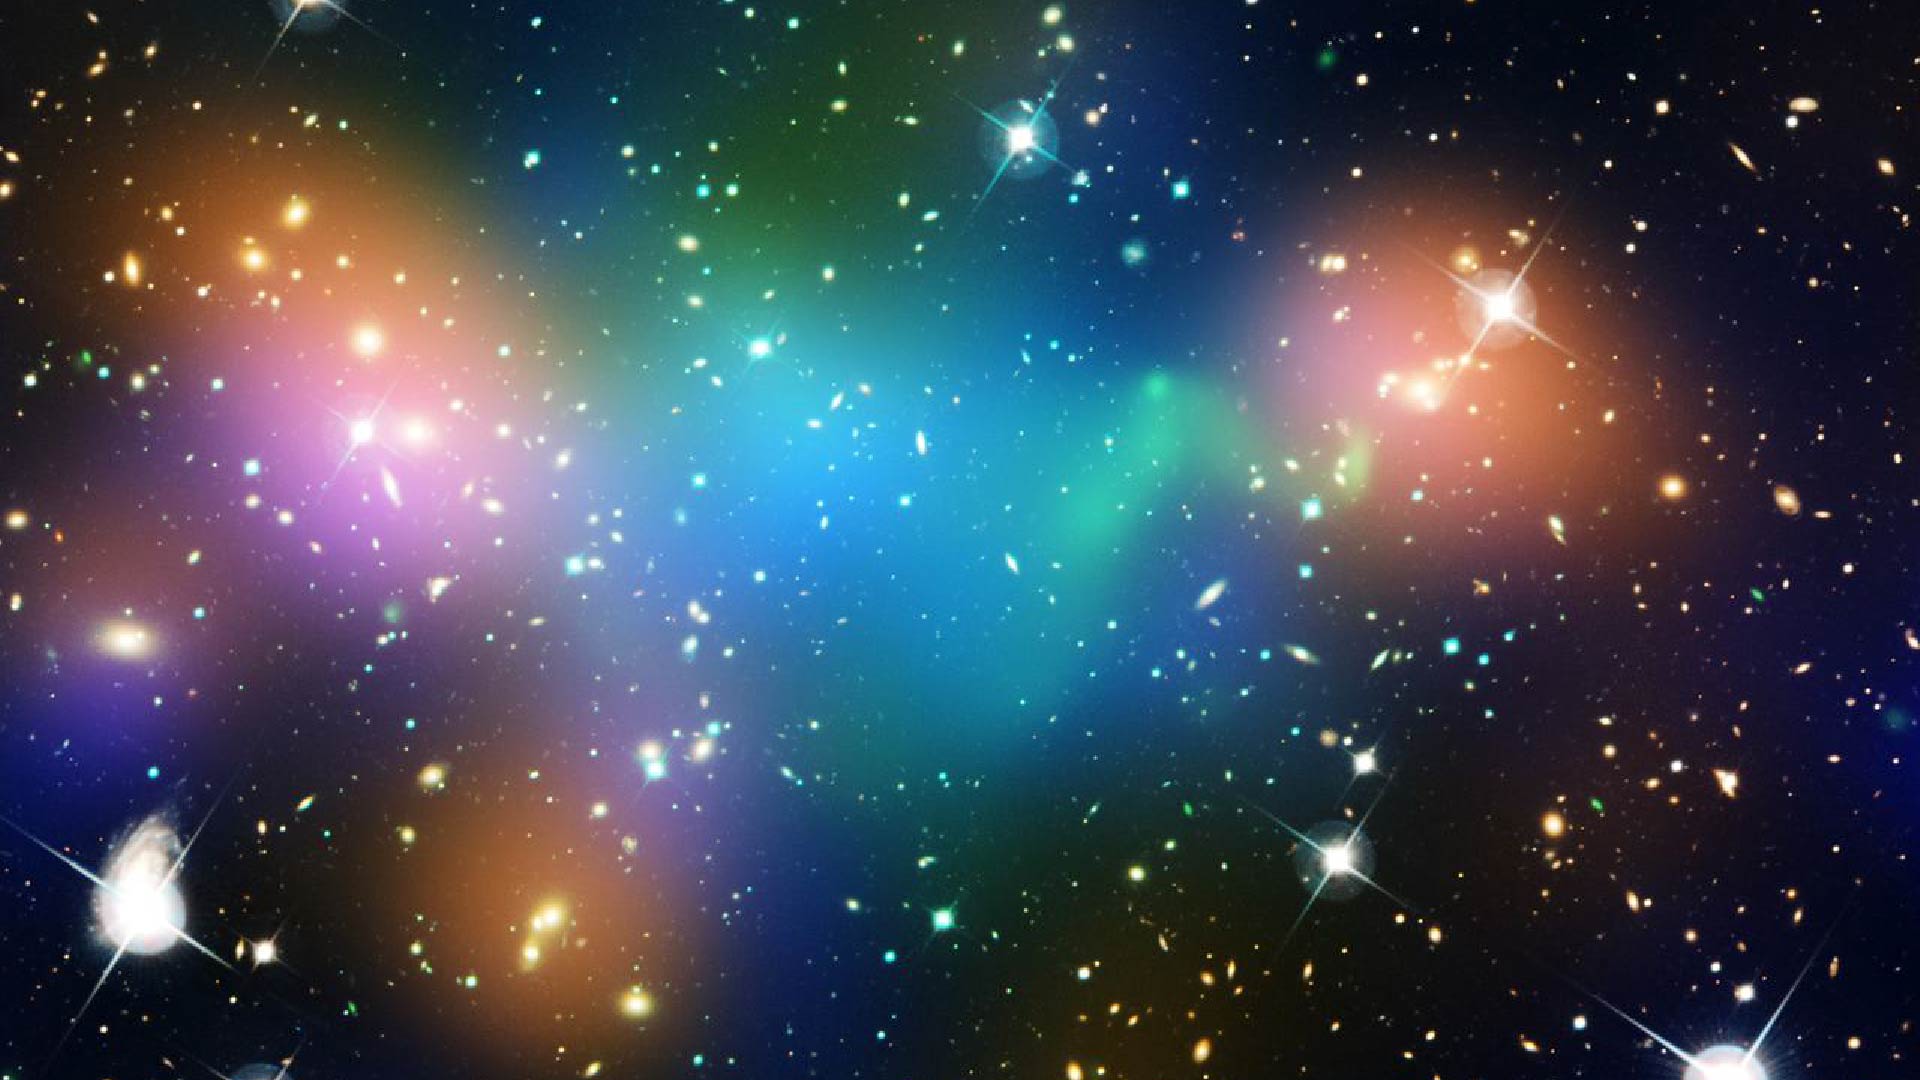 This composite image shows the distribution of dark matter, galaxies, and hot gas in the core of the merging galaxy cluster Abell 520. Superimposed on the image are  maps showing the concentration of starlight, hot gas, and dark matter in the cluster.